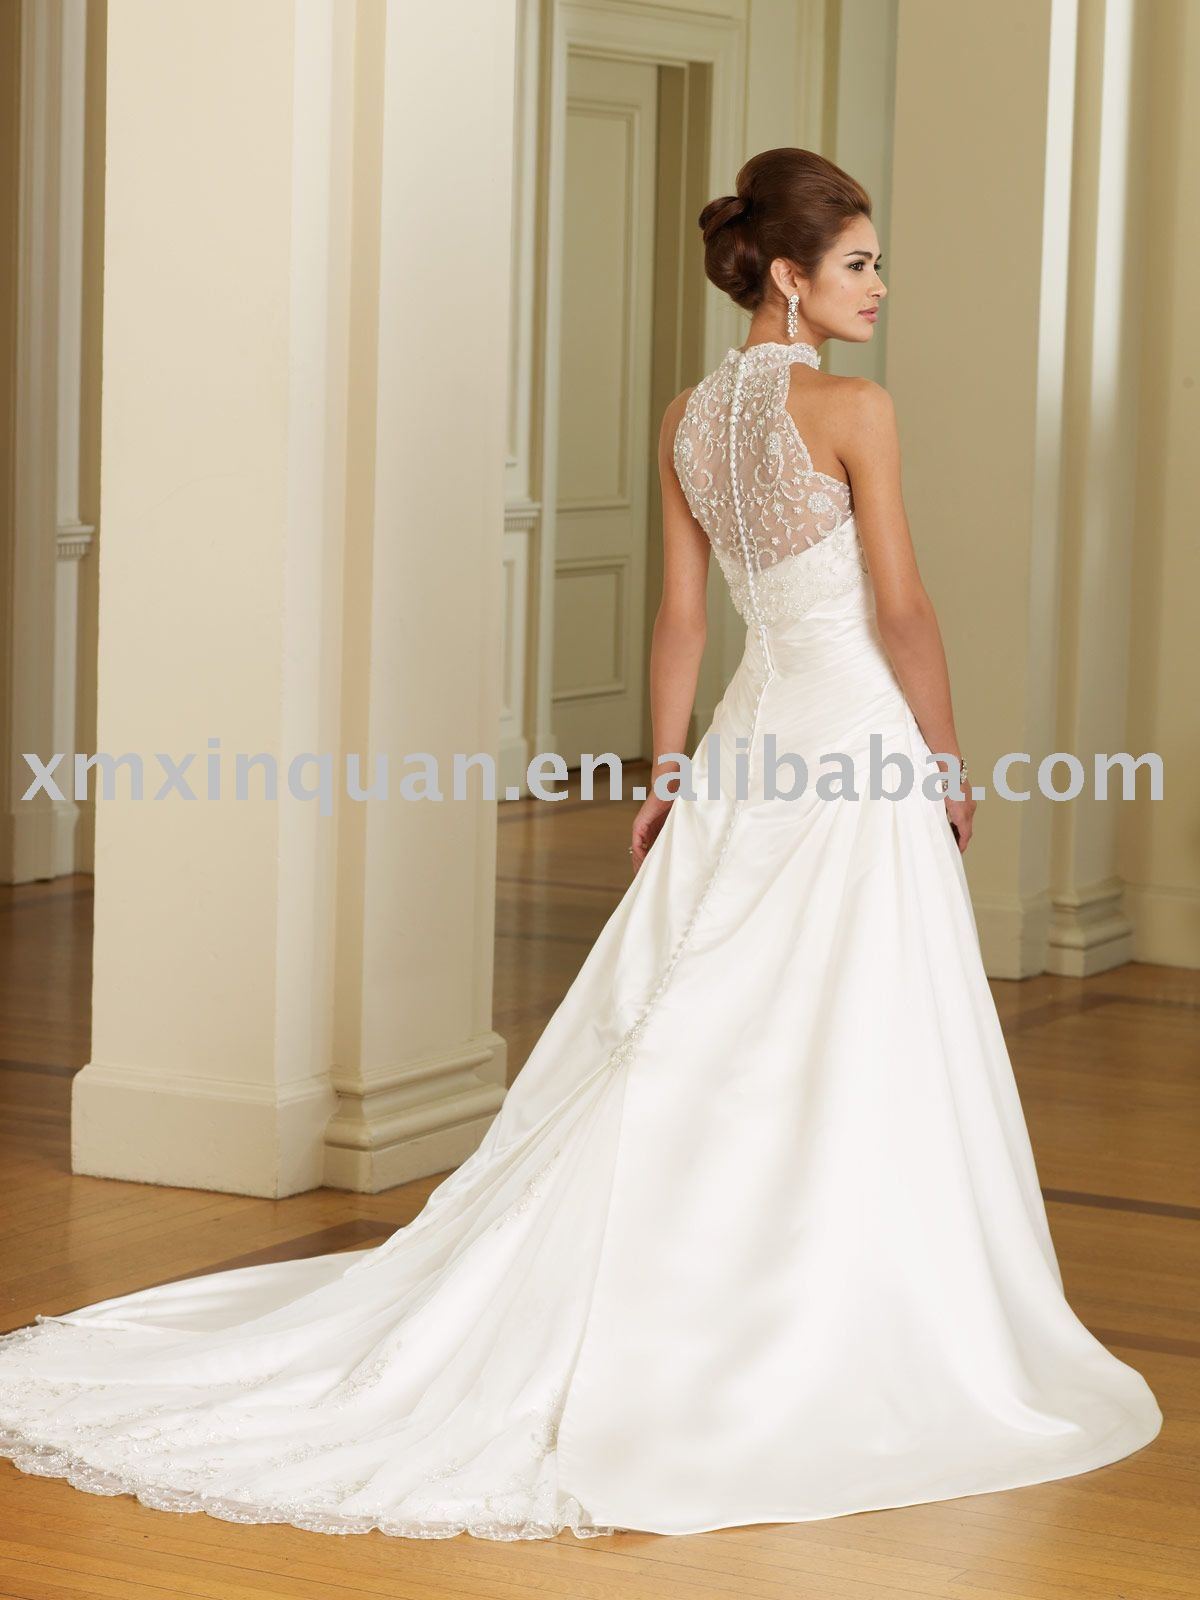 simple elegant backless wedding dress with lace